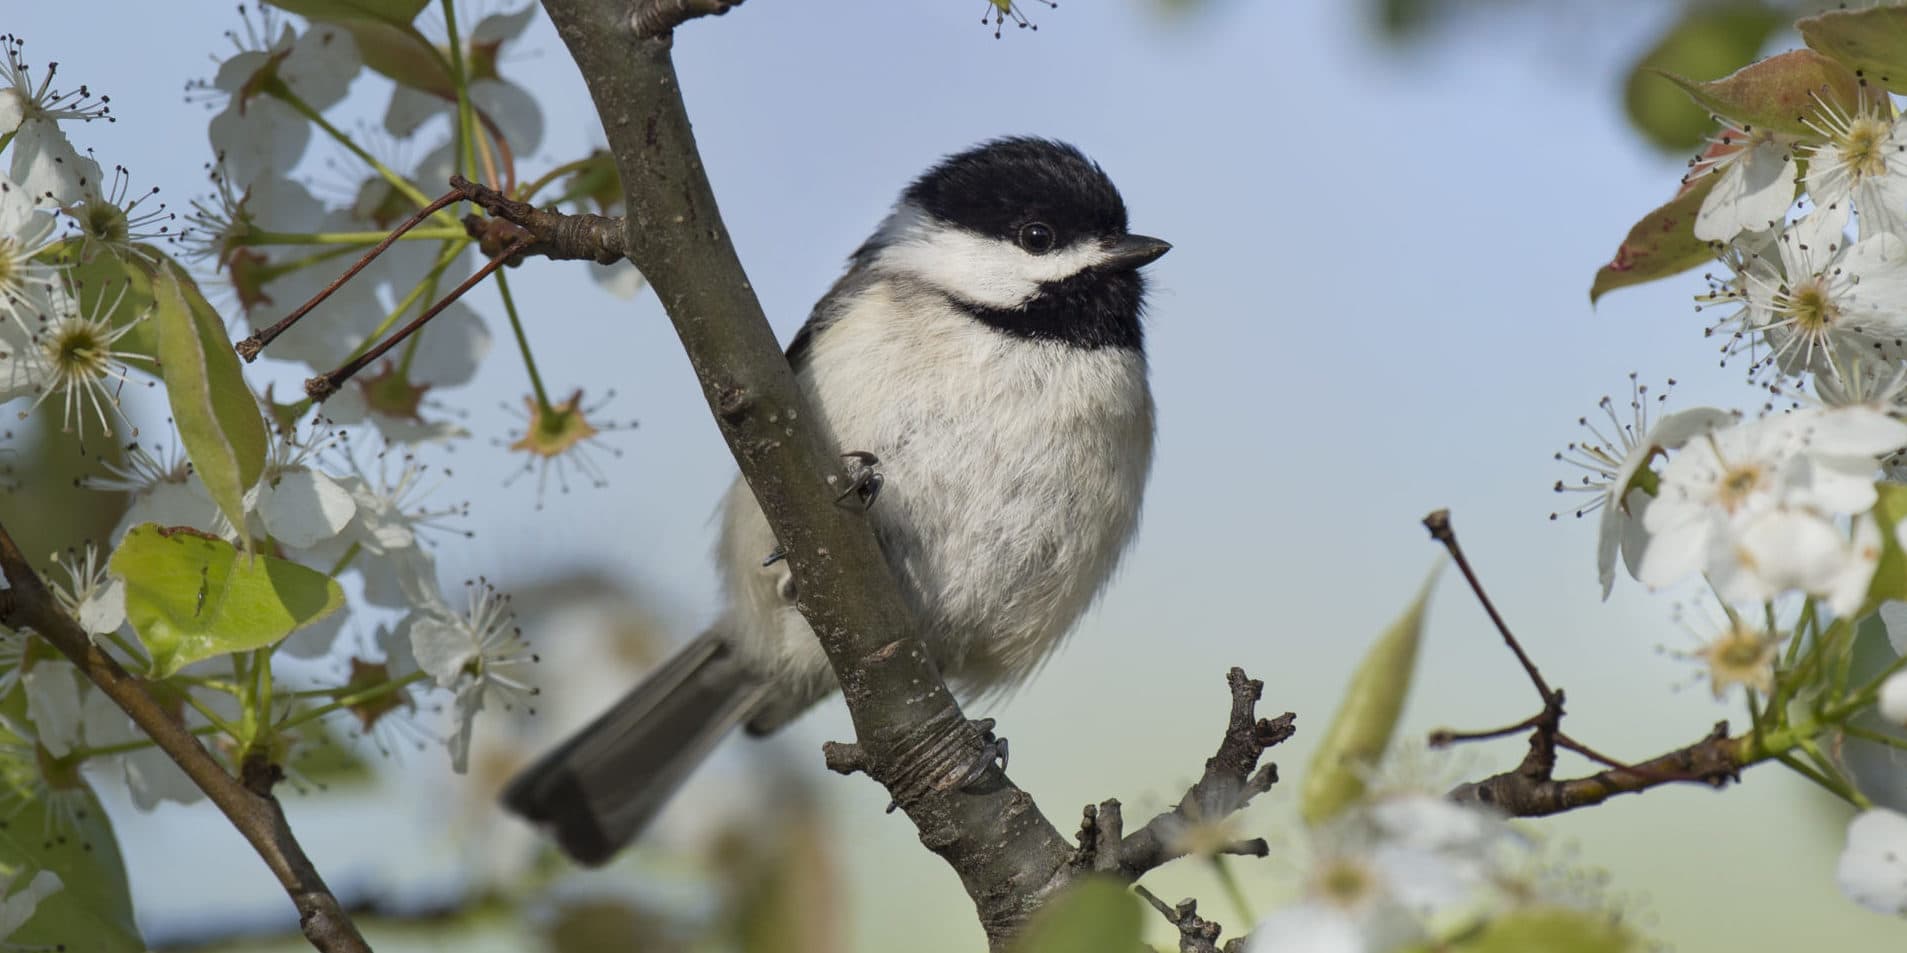 A black and white colored Carolina Chickadee sits perched on a tree branch framed with white flowers and leaves surrounding it.